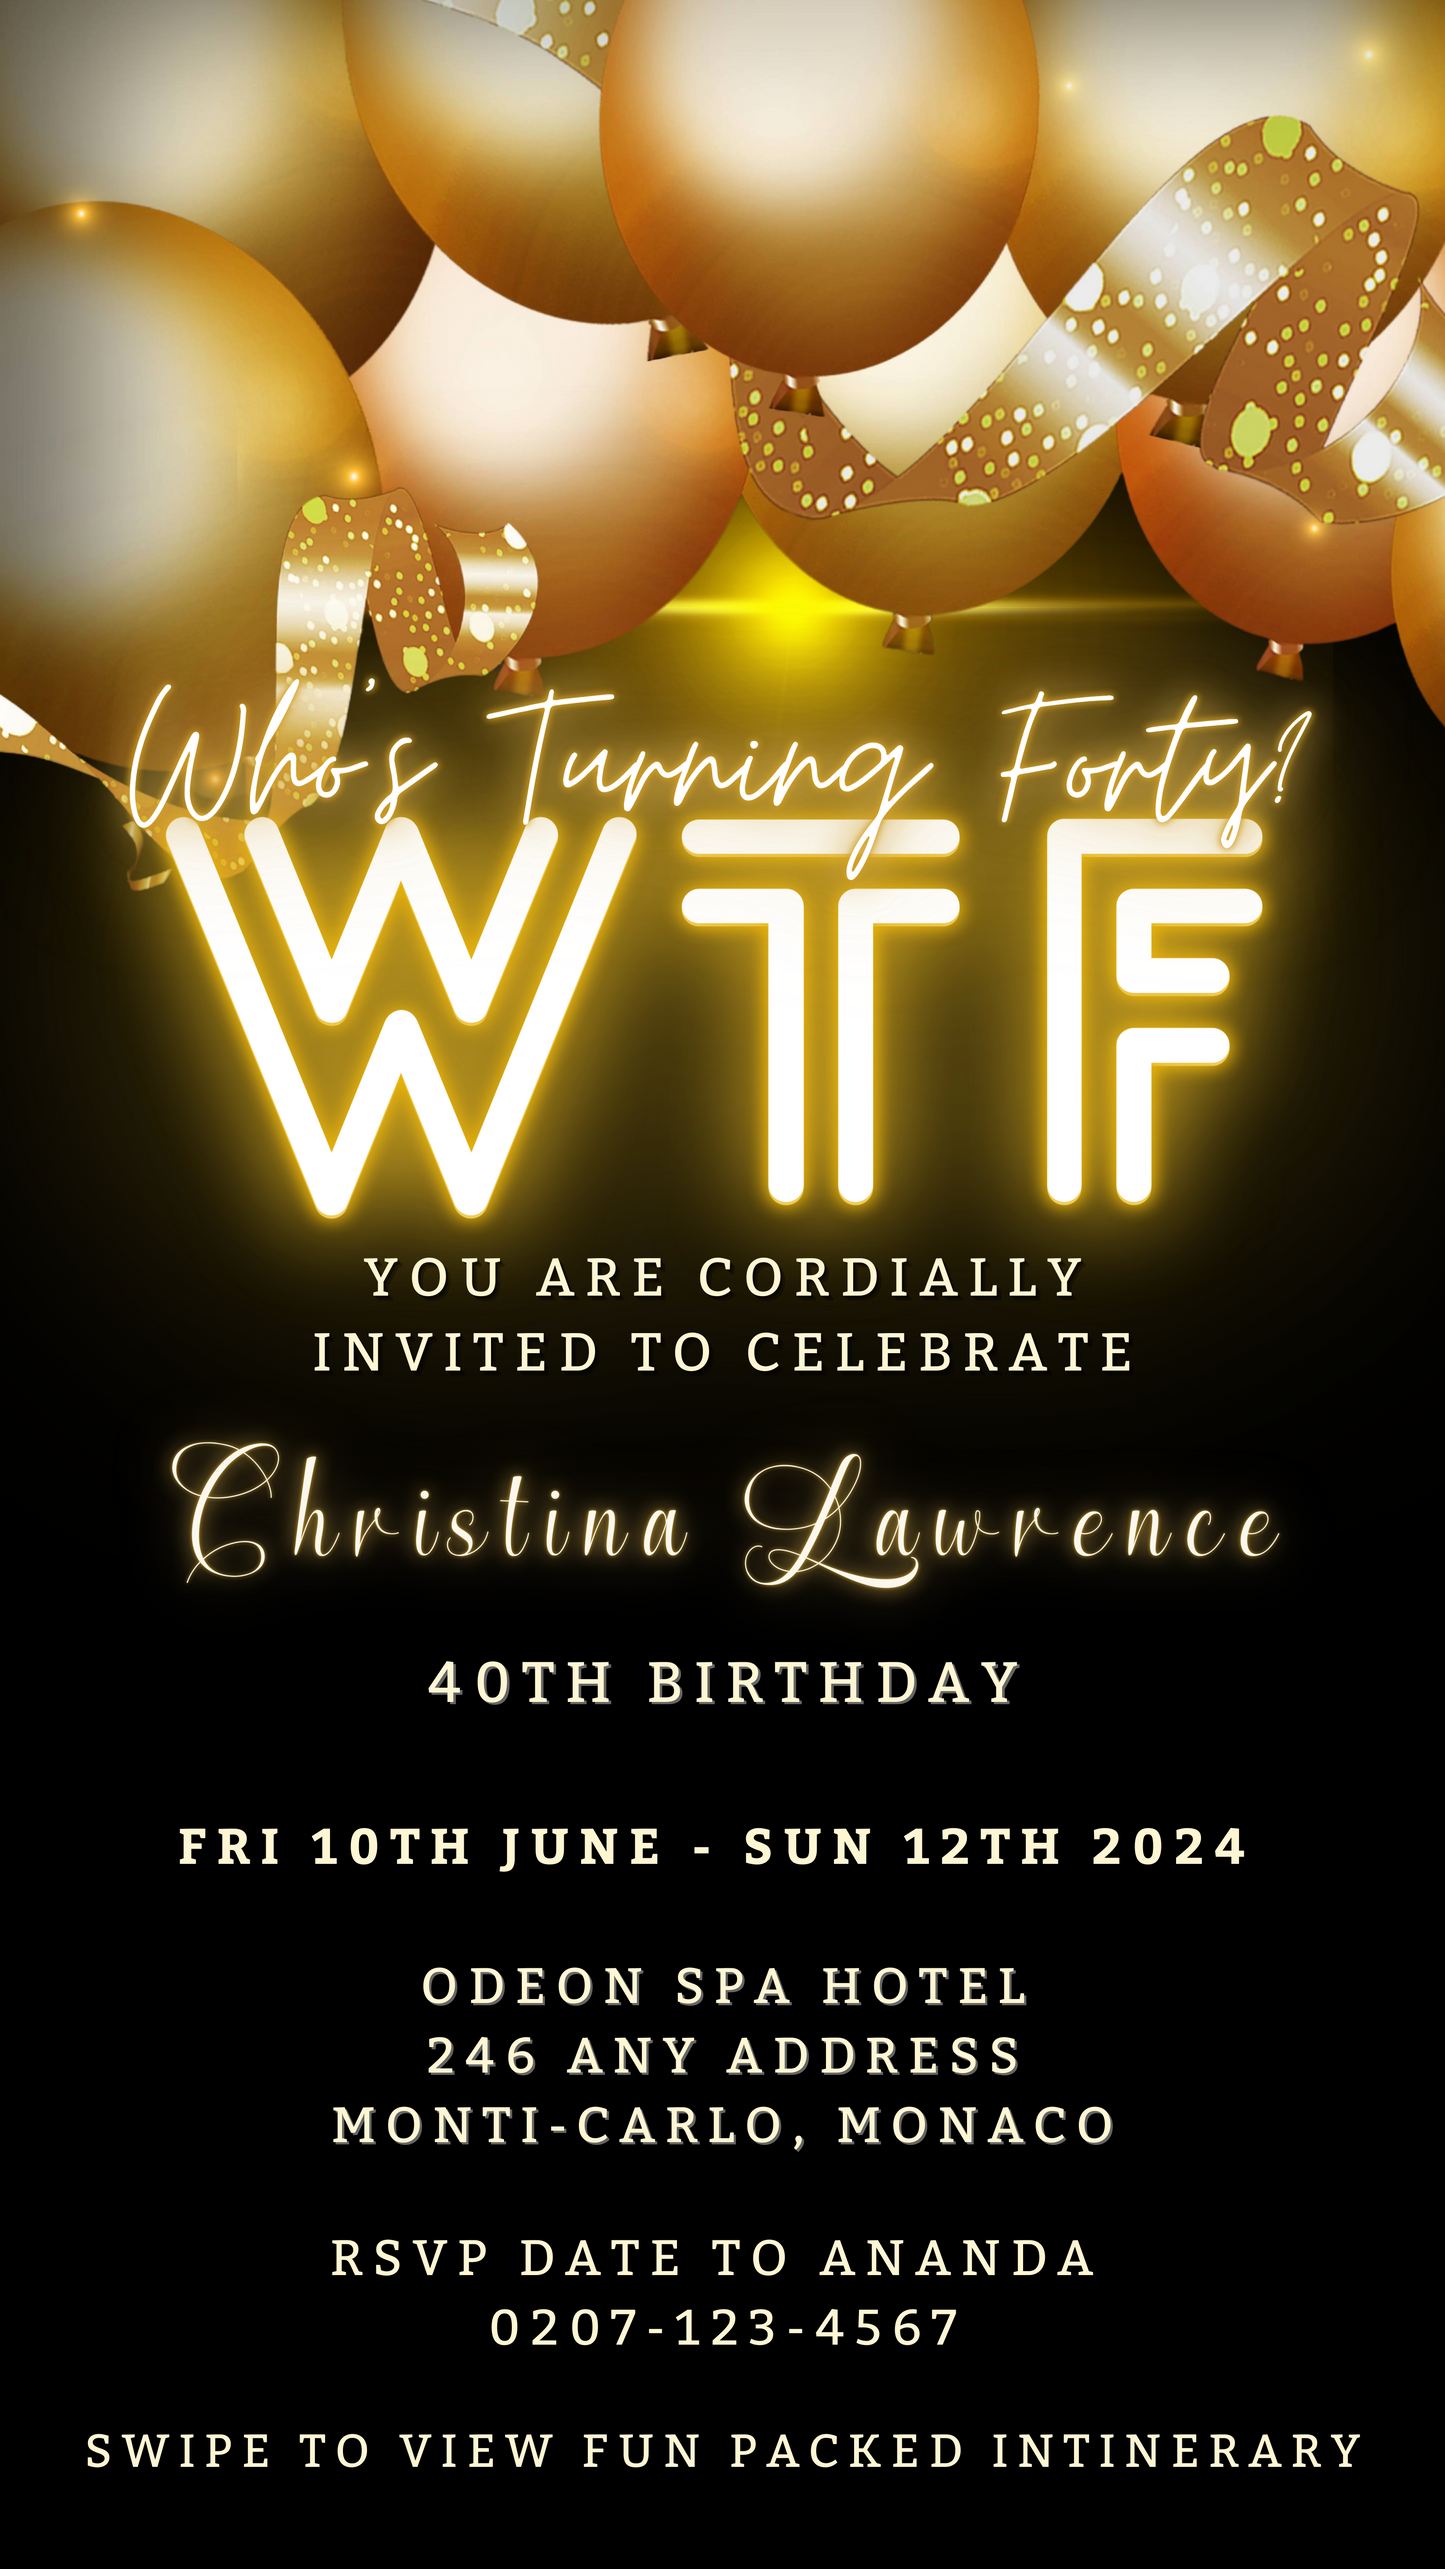 Black and gold digital invitation with floating balloons and customizable text for WTForty Weekend event, available for editing via Canva.